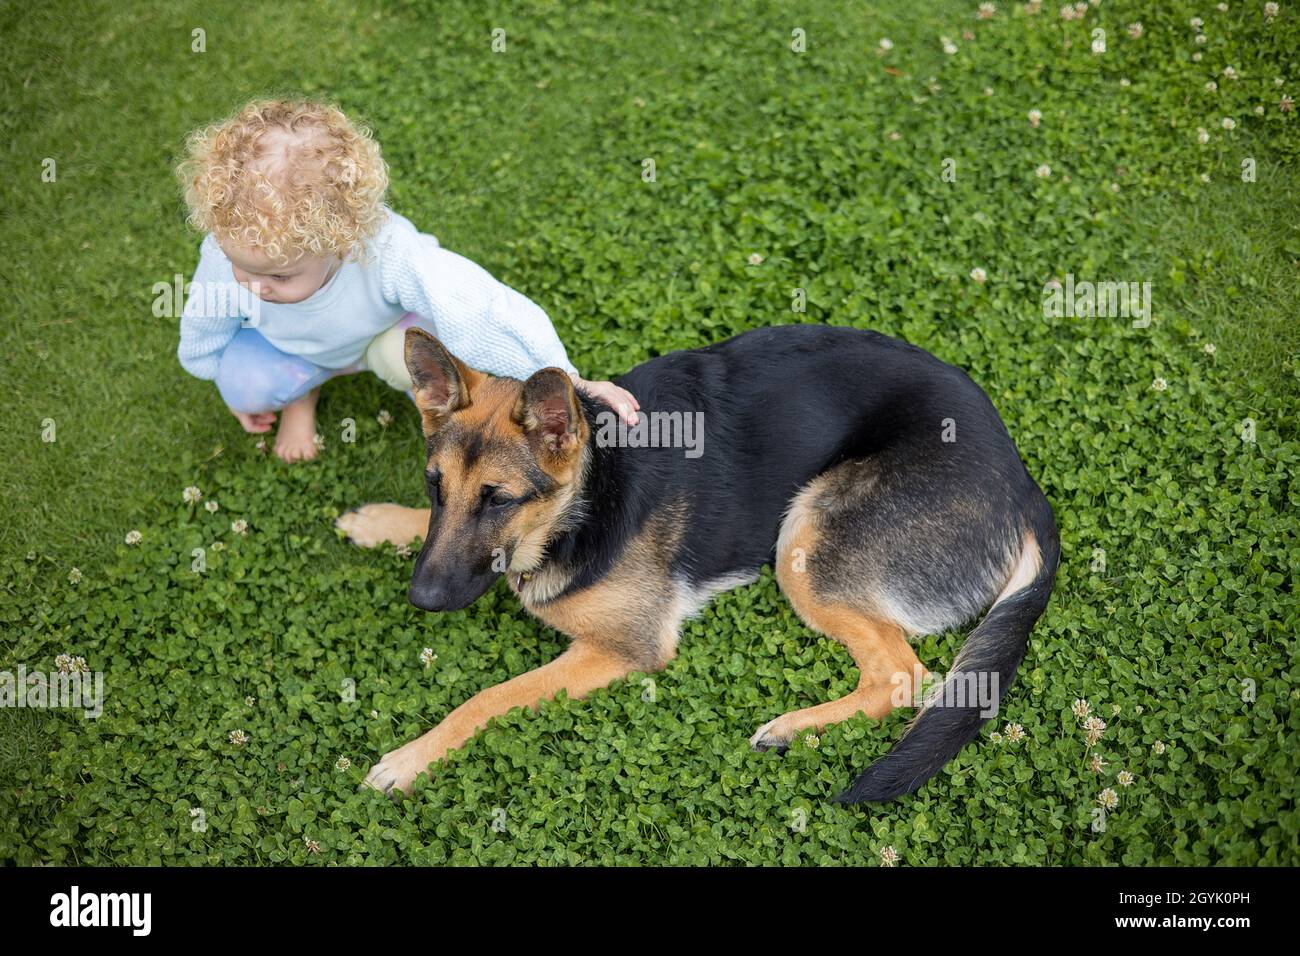 Young Girl and German Shepherd puppy Stock Photo